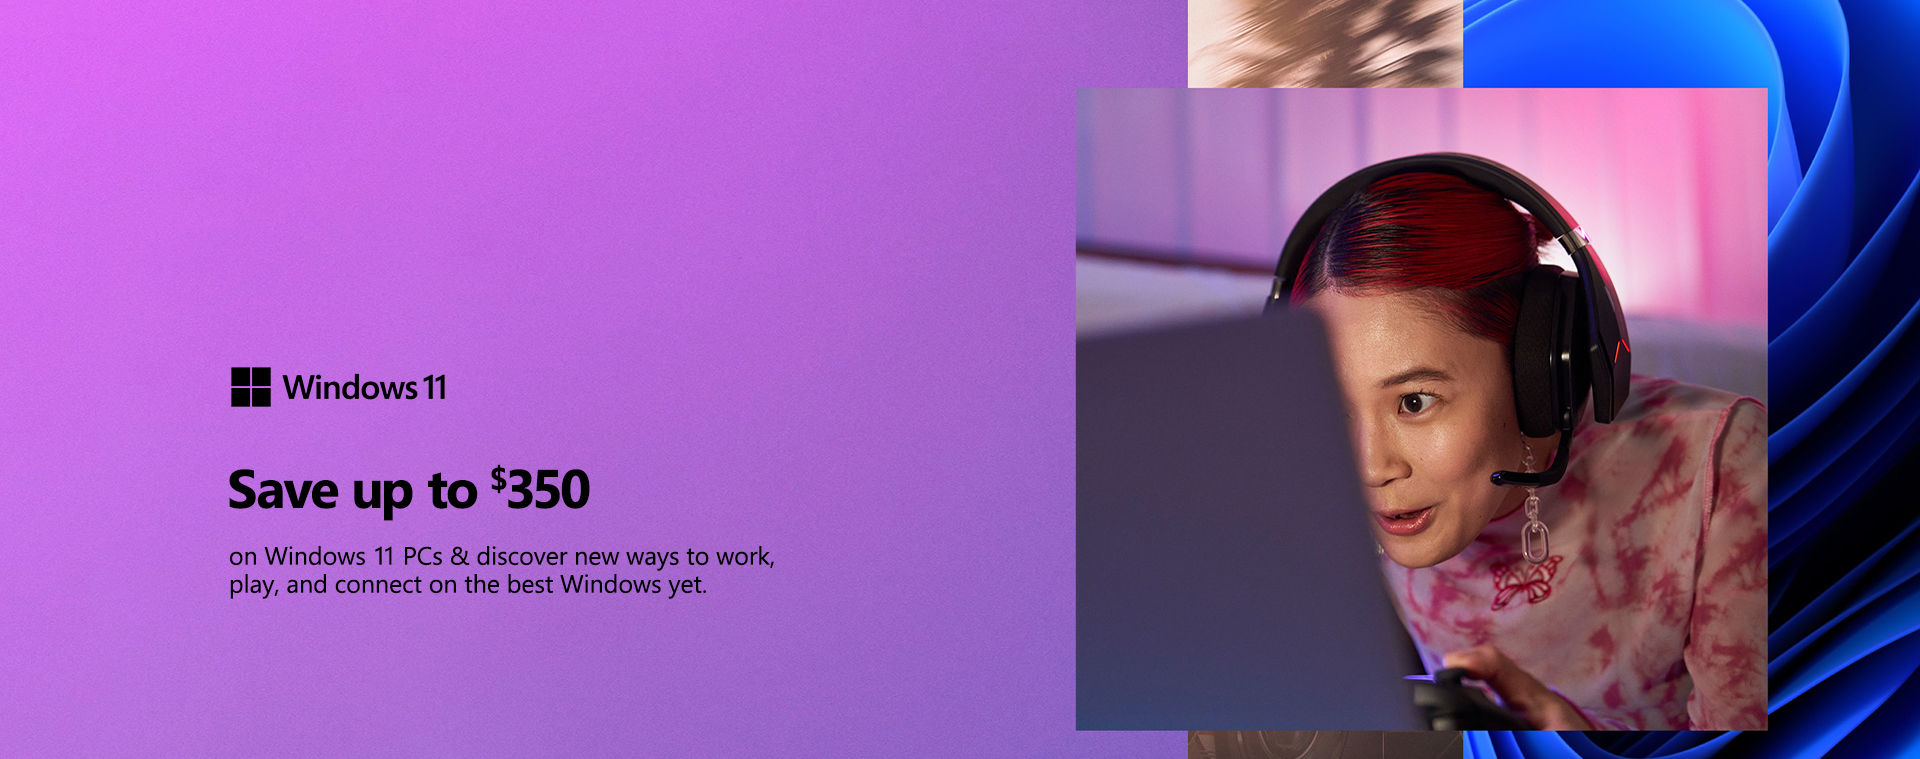 Windows 11 Devices 08.10.banner